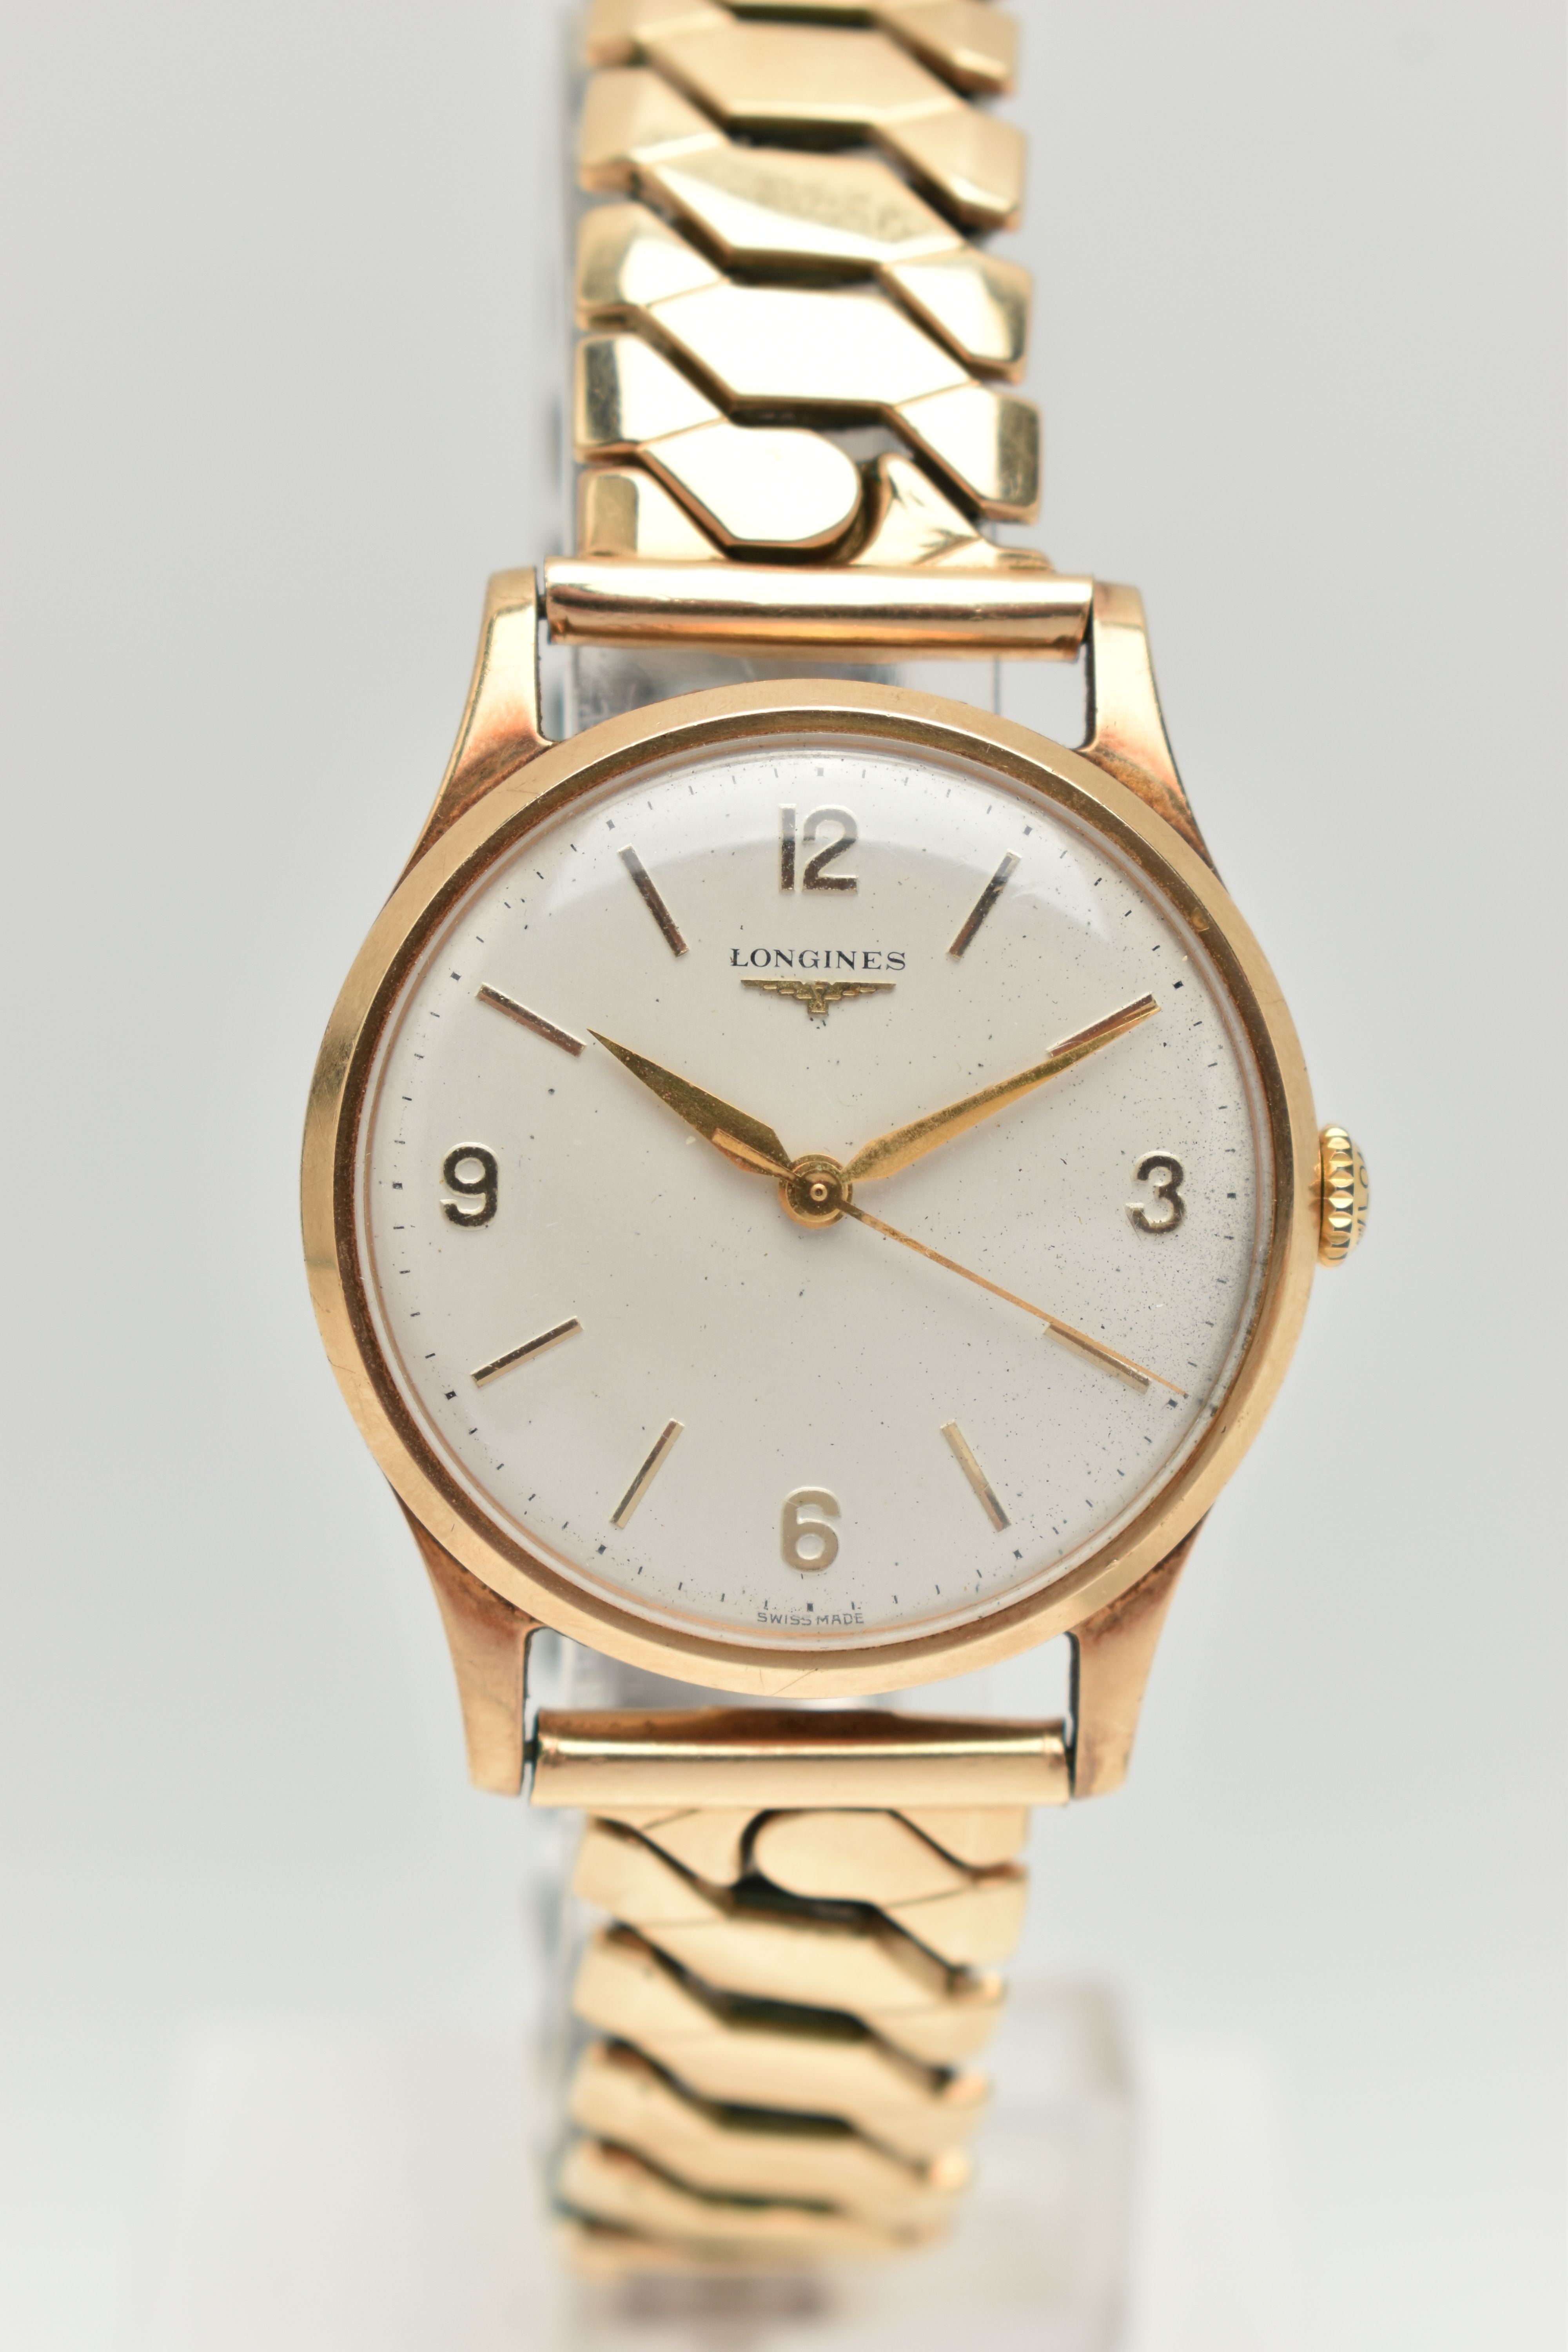 A GENTS 9CT GOLD 'LONGINES' WRISTWATCH, manual wind, round silver dial signed 'Longines', Arabic